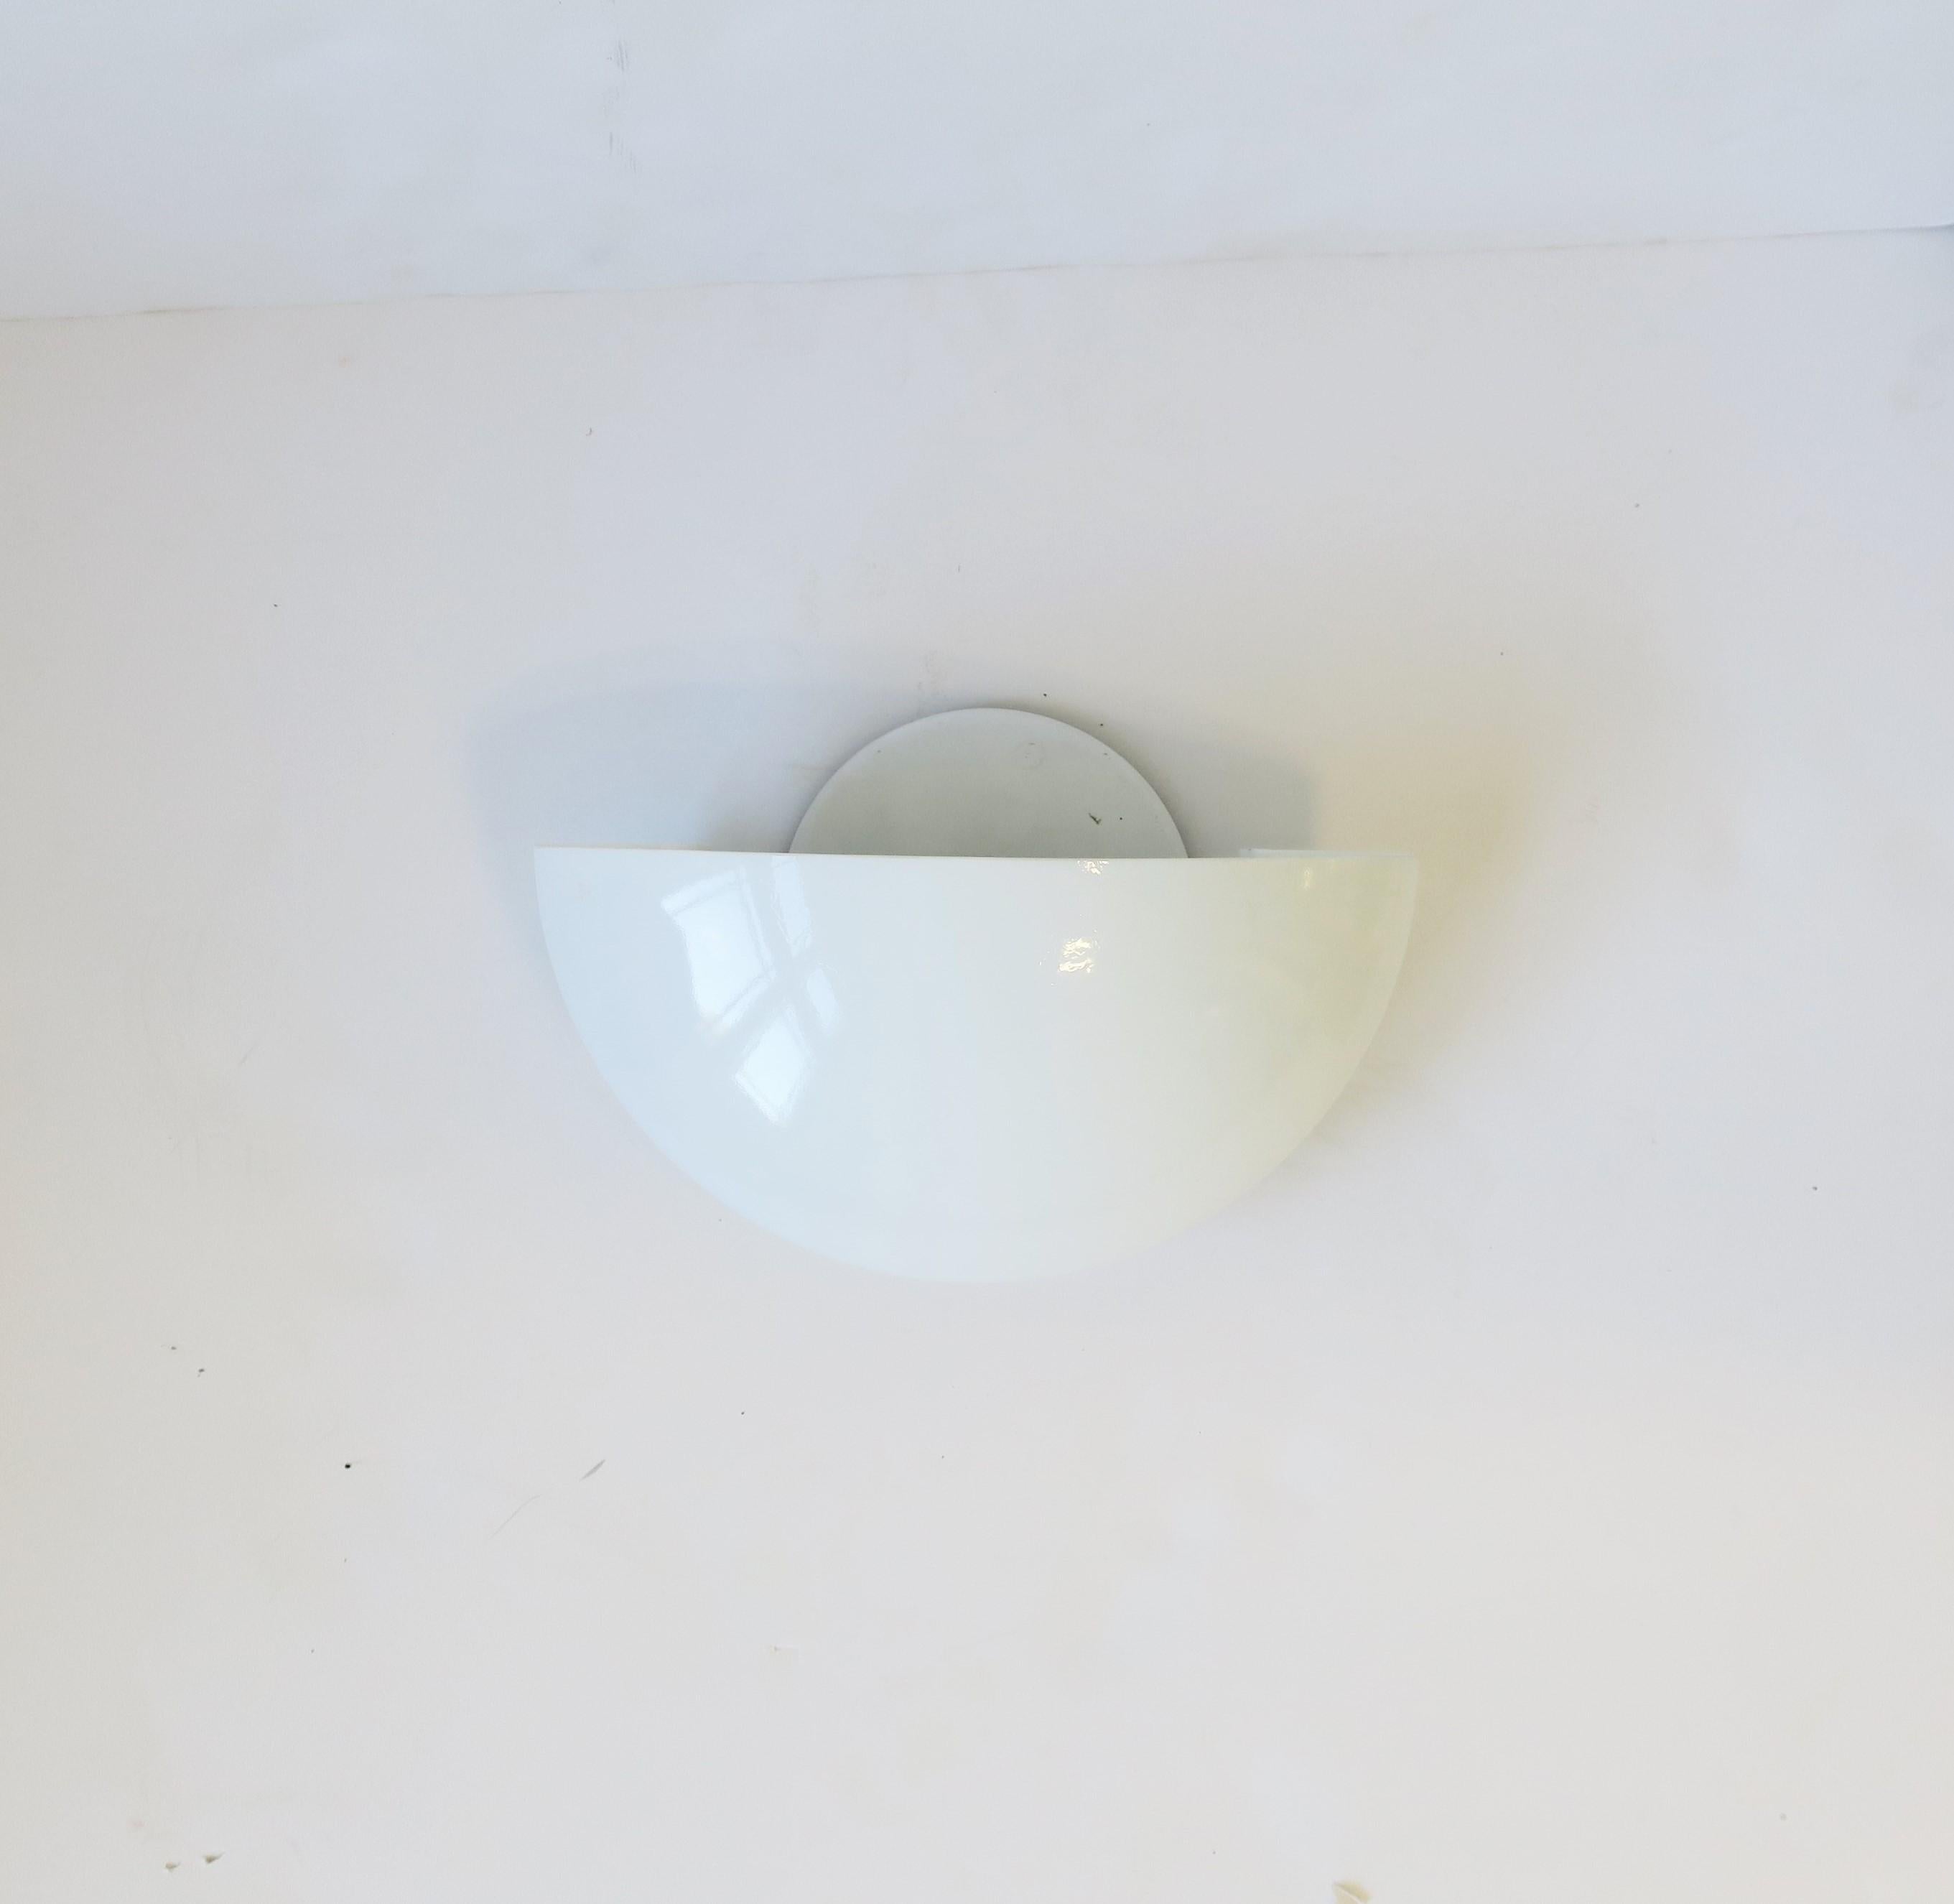 A single Italian white glass and metal wall sconce in the Art Deco style by Rialto, circa late-20th century, Italy. With maker's mark as shown in images. Max bulb 75W as marked. Good for indoor or an outdoor covered area as marked on label. No chips